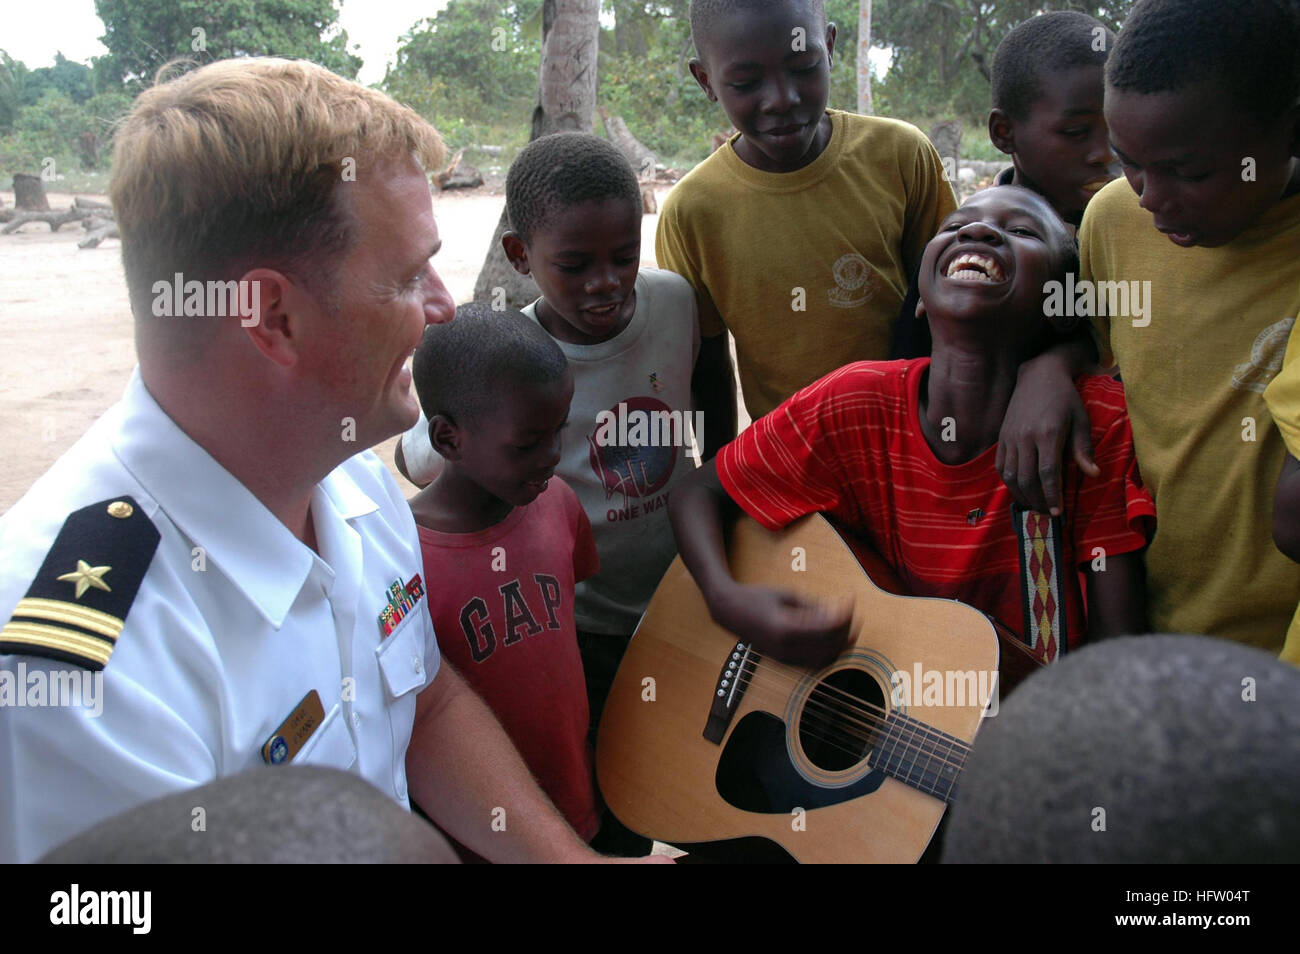 070908-N-3255B-004 DAR ES SALAAM, Tanzania (Sept. 8, 2007) - Lt. Dave Evans, assistant director of the U.S. Navy Europe-Africa Band, Topside, gives a guitar lesson to children at the Yatima Group Orphanage. Topside is aboard guided-missile destroyer USS Forrest Sherman (DDG 98), one of several ships of the NavyÕs Southeast Africa Task Group assigned to build partnerships and improve maritime security in the region. U.S. Navy photo by Gillian Brigham (RELEASED) US Navy 070908-N-3255B-004 Lt. Dave Evans, assistant director of the U.S. Navy Europe-Africa Band, Topside, gives a guitar lesson to ch Stock Photo